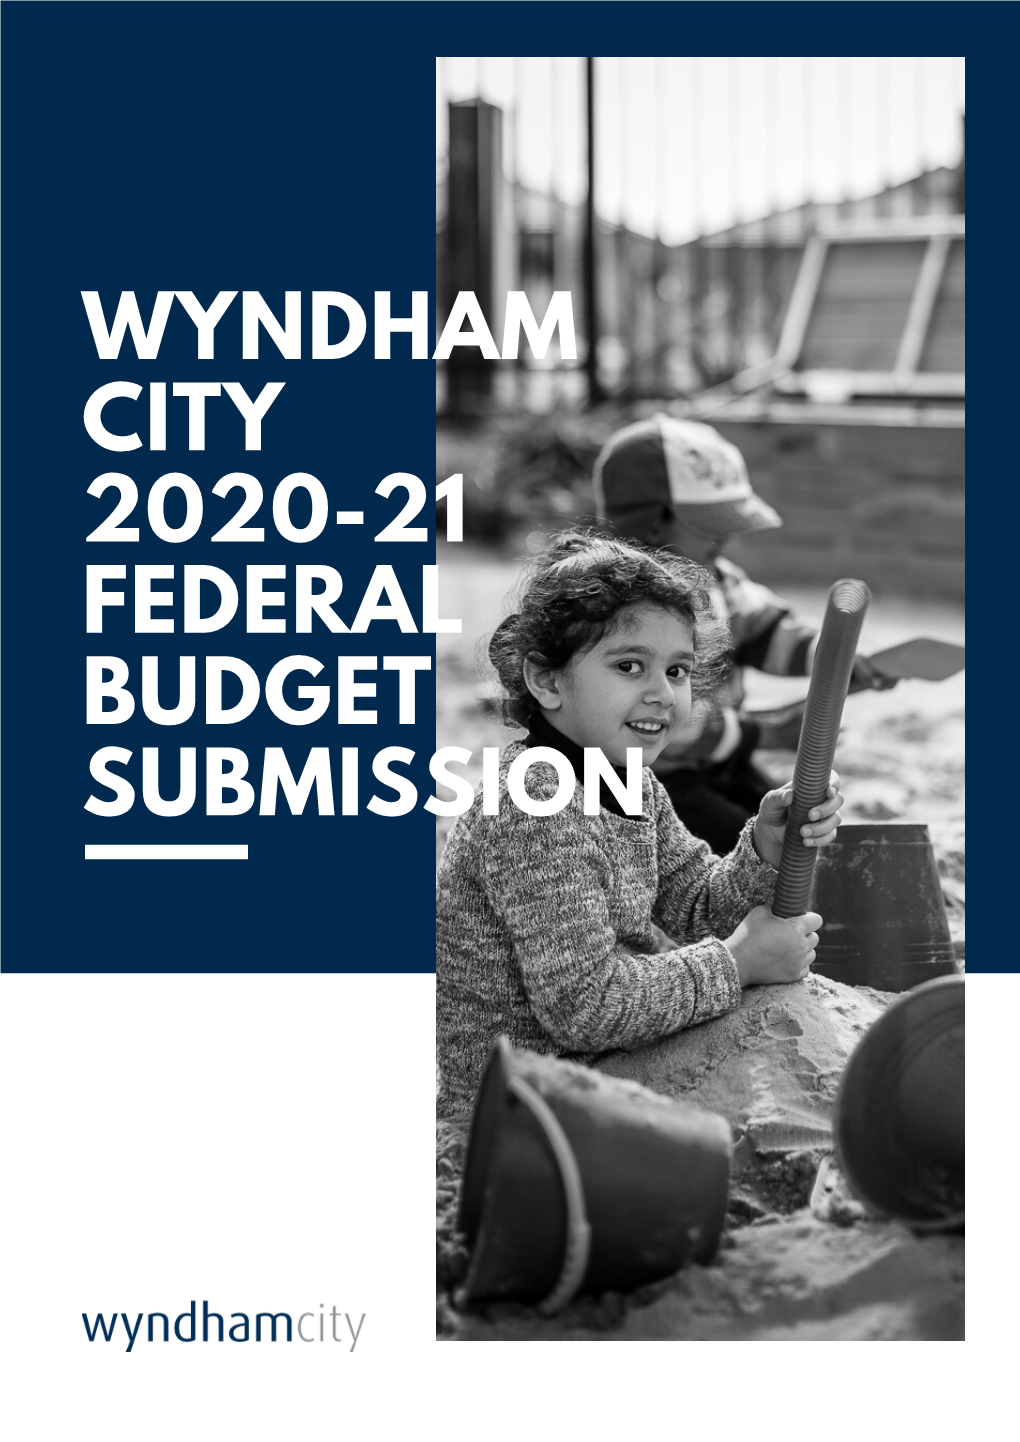 Wyndham City 2020-21 Federal Budget Submission Contents